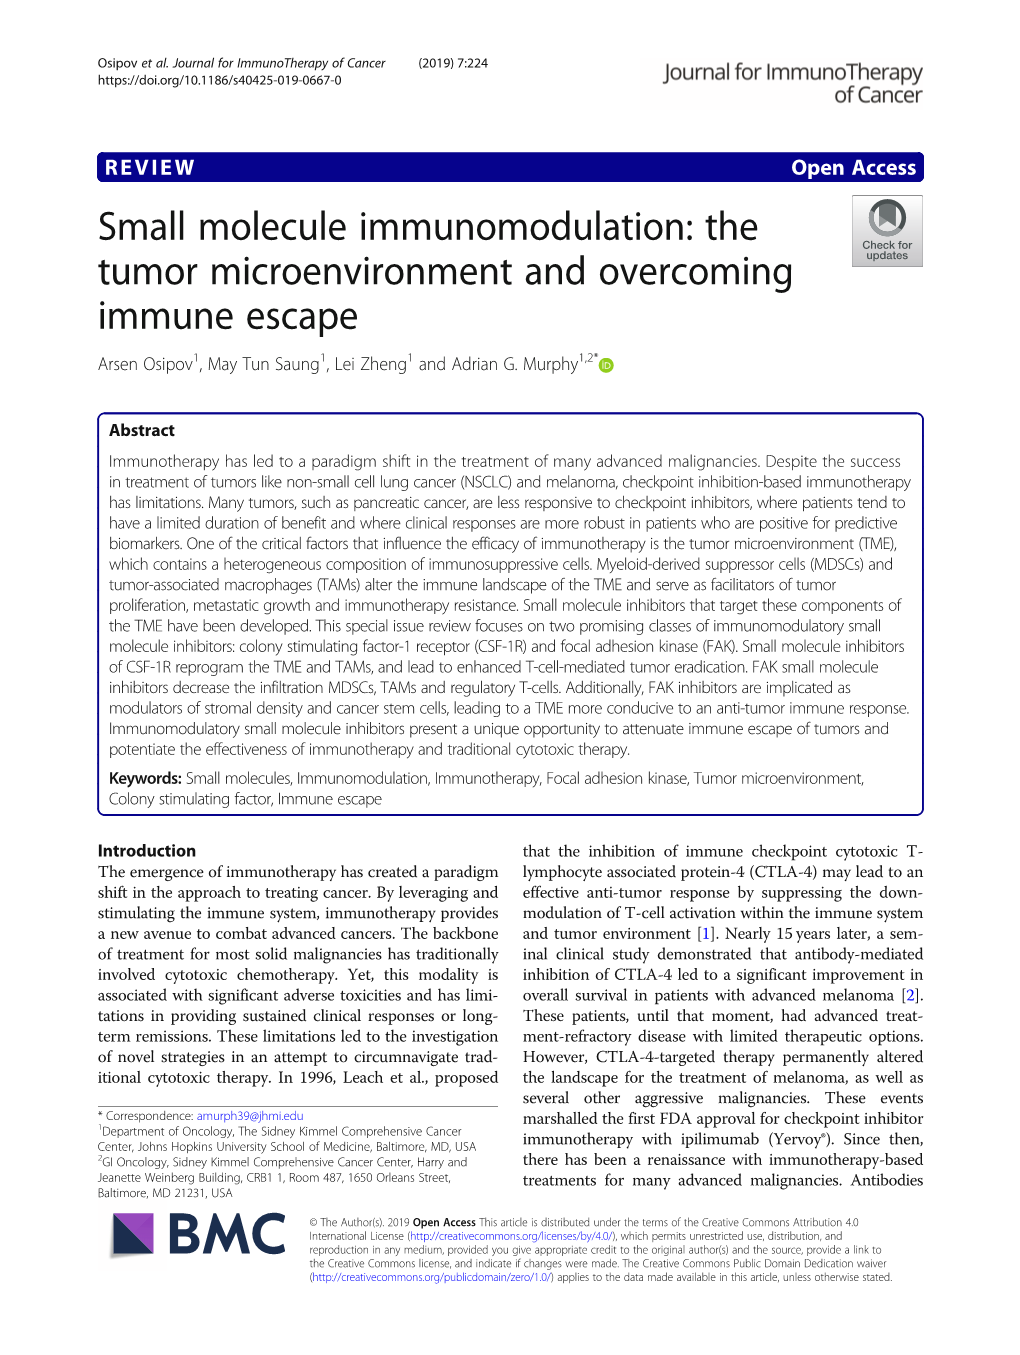 The Tumor Microenvironment and Overcoming Immune Escape Arsen Osipov1, May Tun Saung1, Lei Zheng1 and Adrian G